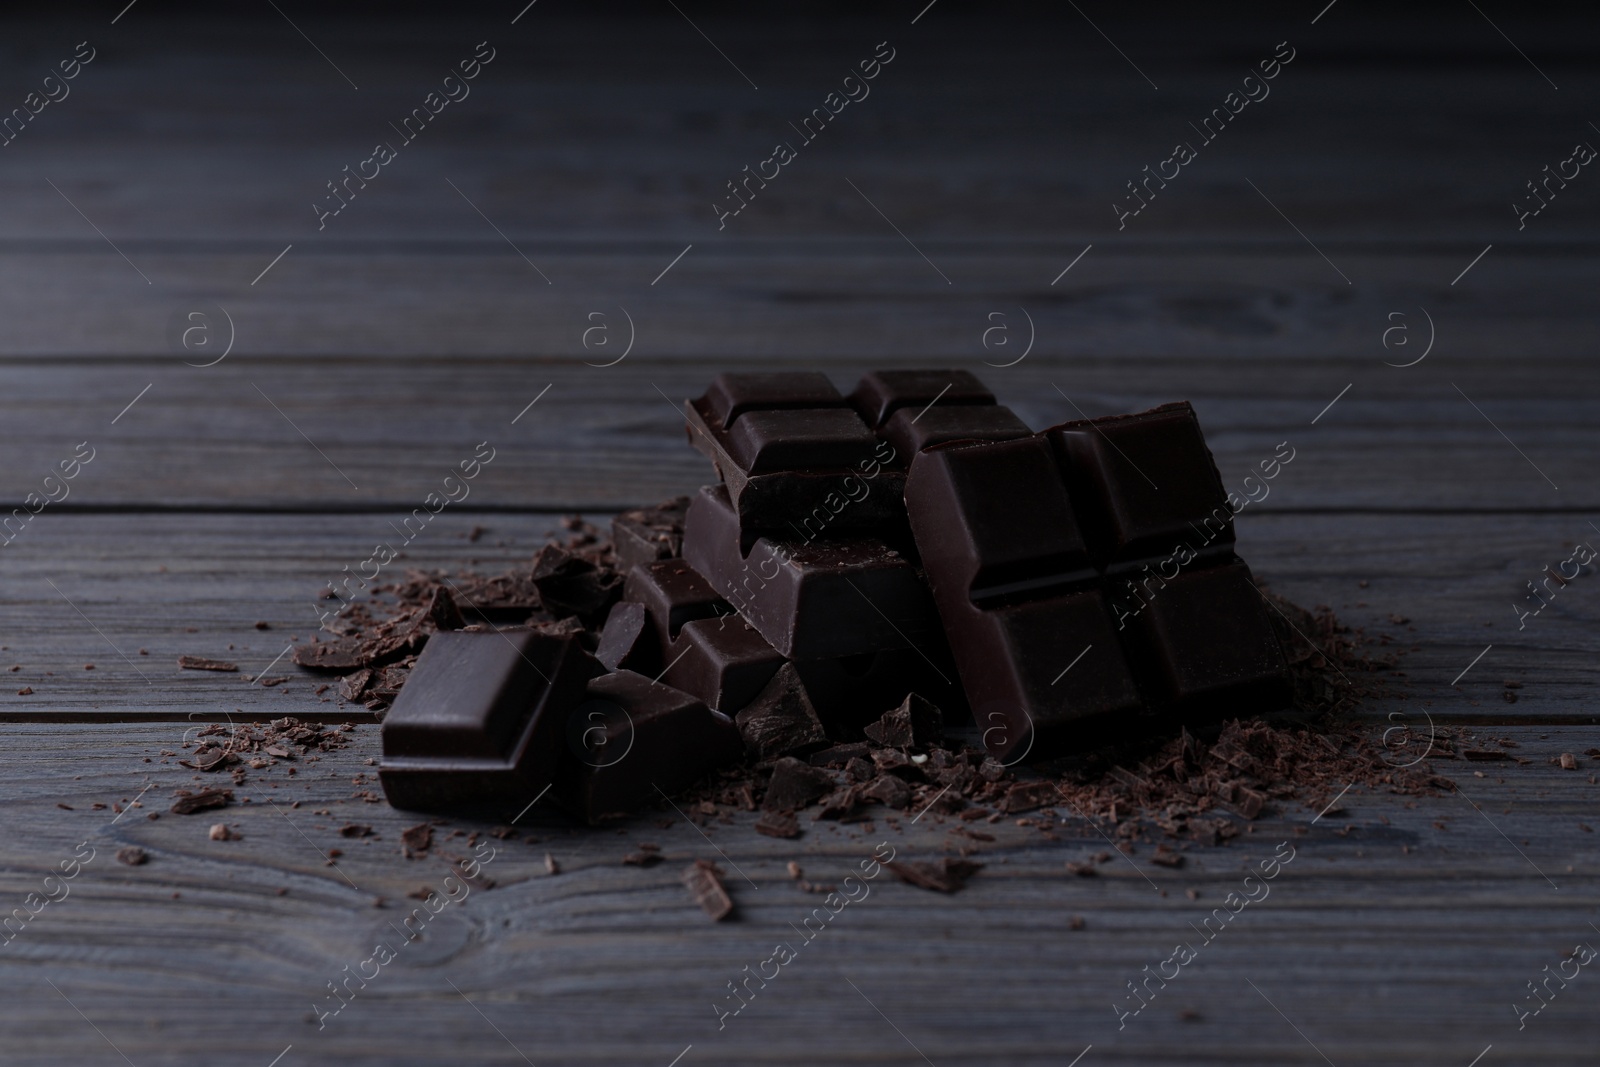 Photo of Pieces of delicious dark chocolate on wooden table